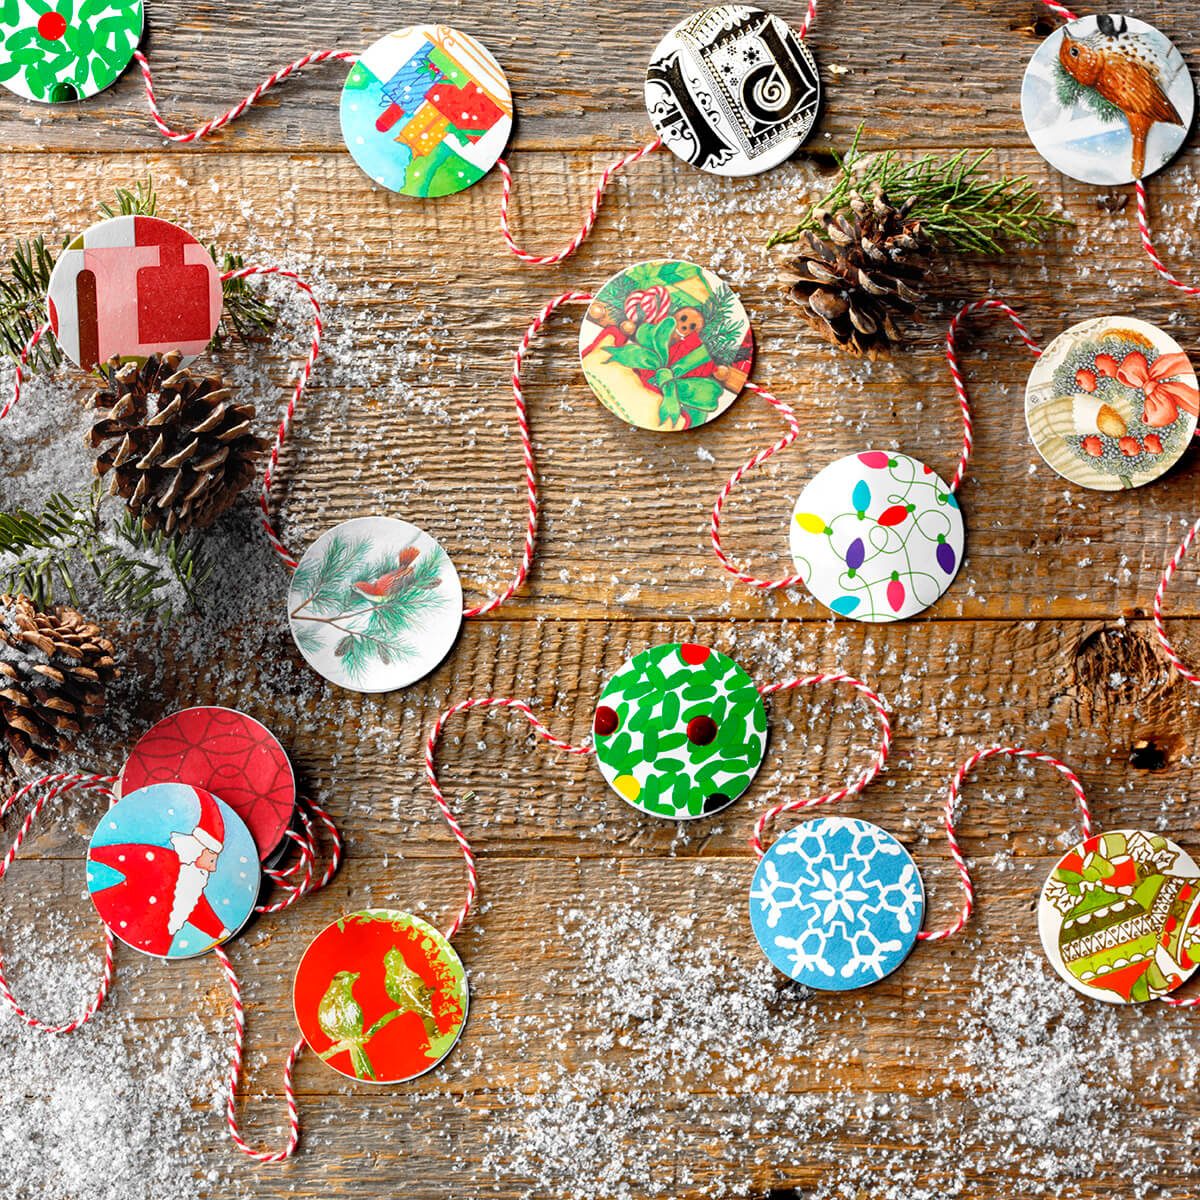 10 Christmas Card Crafts to Make With Last Year's Cards | Taste of Home